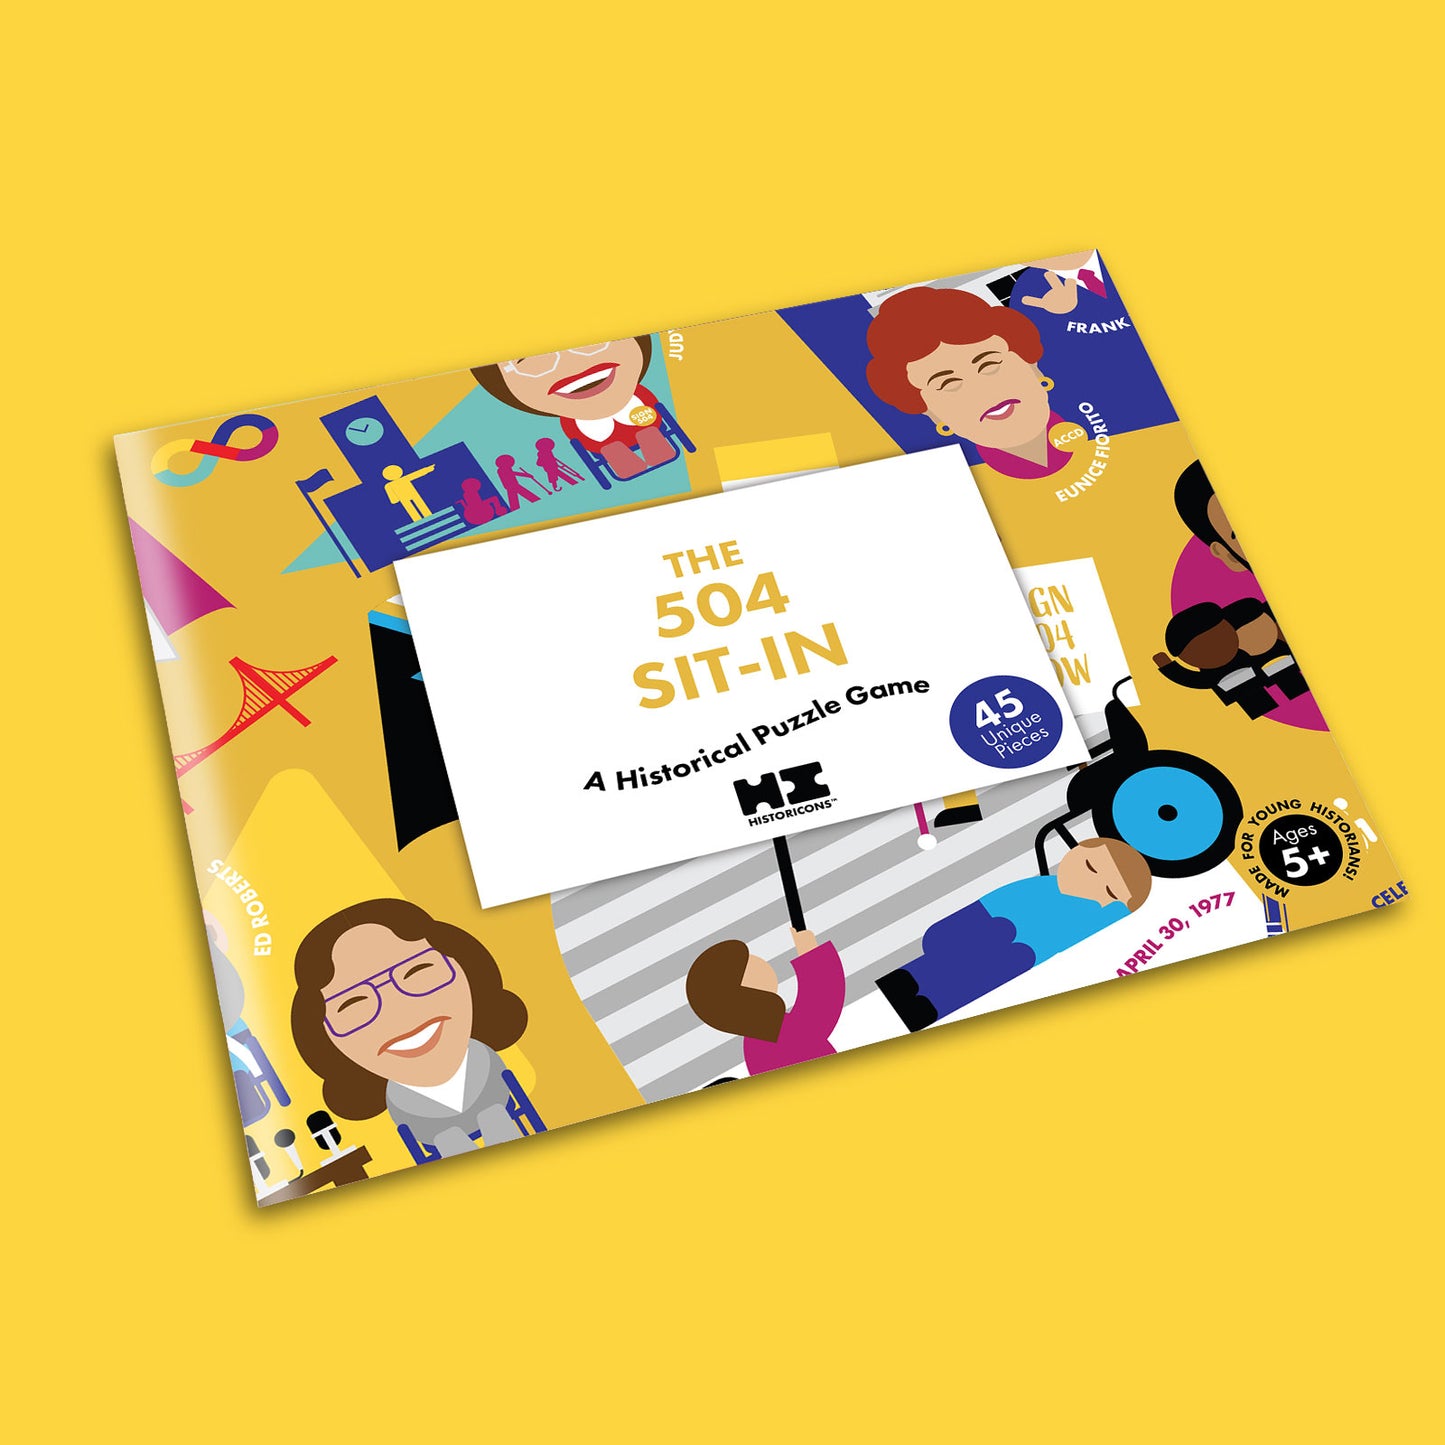 Pictured is the Historicons 504 Sit-In kid's puzzle game in its packaging. The puzzle comes flat-packed in a glossy storage envelope for compact storage. Pictured is the front of the envelope, which is yellow and shows a zoomed in picture of some of the historic icons and vignettes featured on the puzzle, along with text that says: The 504 Sit-In, A Historical Puzzle Game. 45 Unique Pieces. Made for young historians ages 5+.